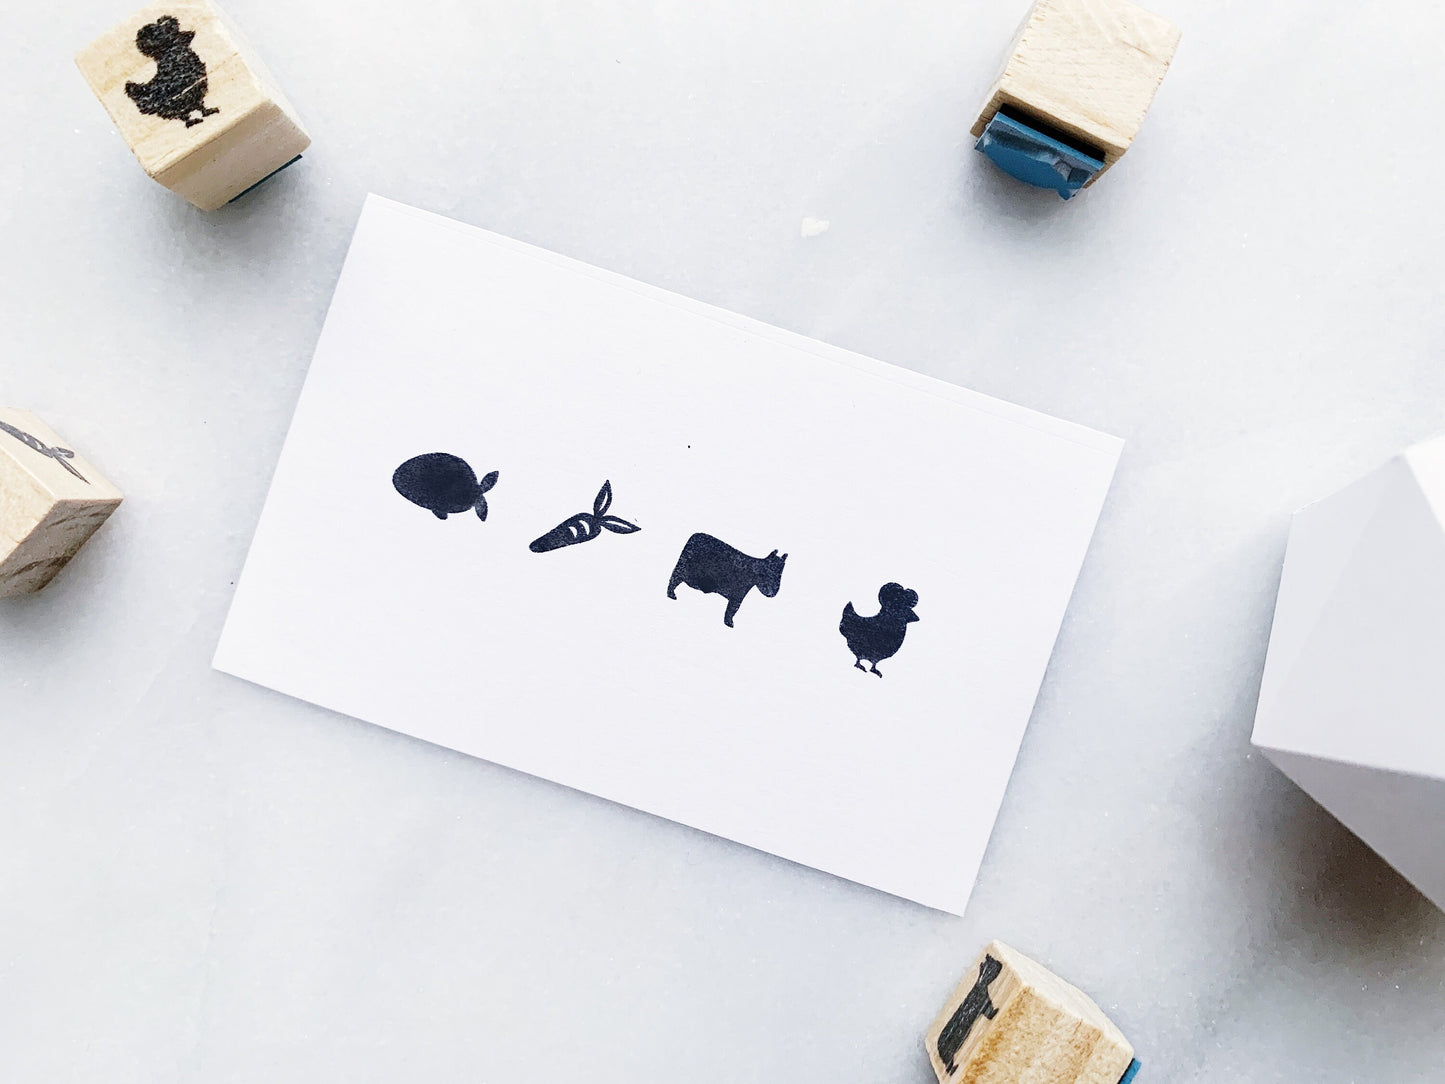 Meal option rubber stamps, tiny rubber stamp, wedding meal option, food option